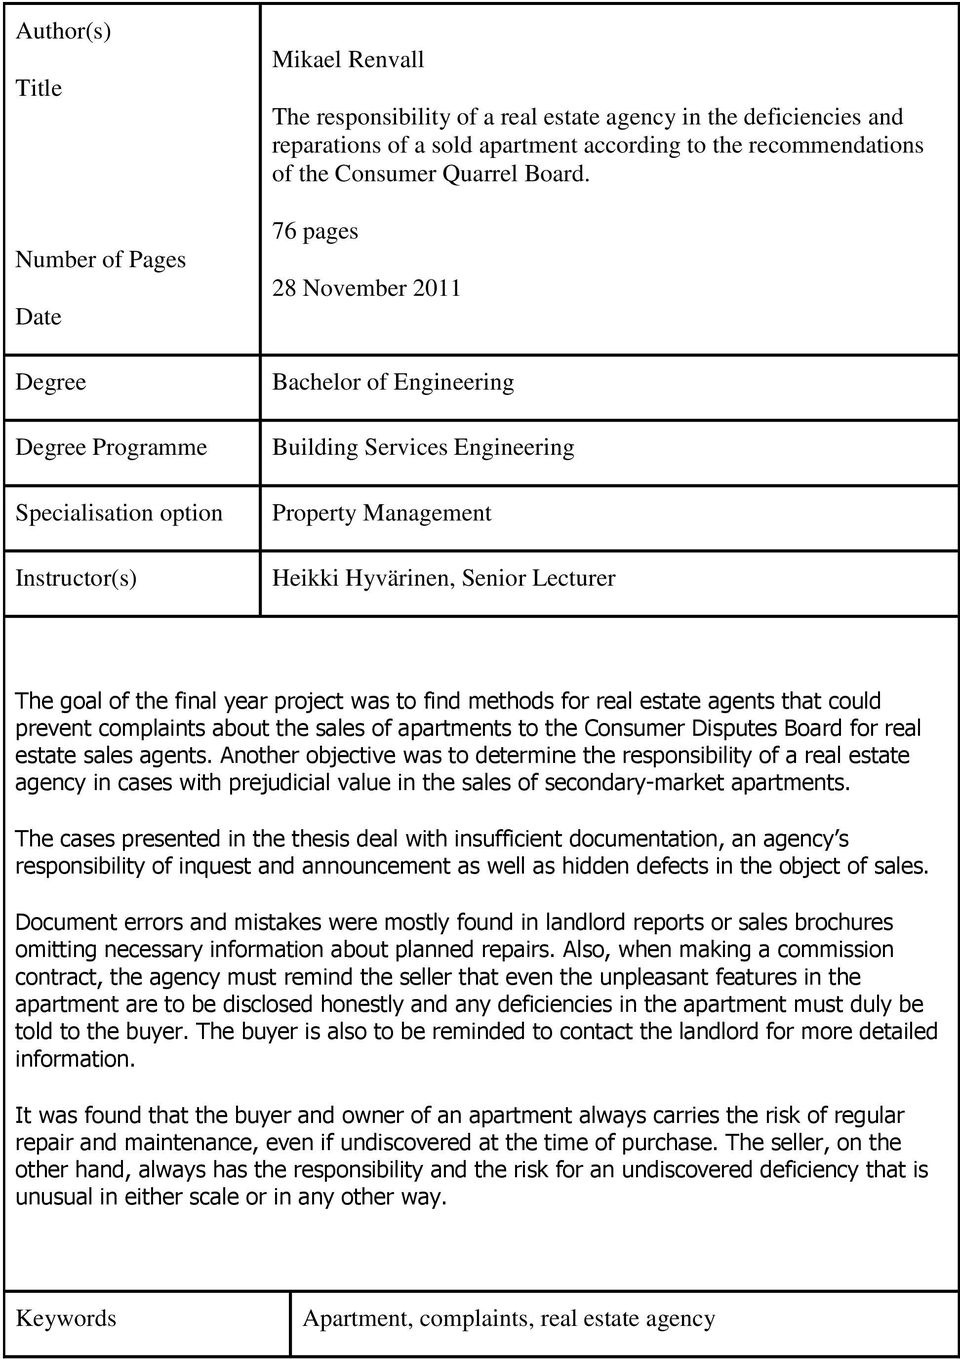 76 pages 28 November 2011 Bachelor of Engineering Building Services Engineering Property Management Heikki Hyvärinen, Senior Lecturer The goal of the final year project was to find methods for real